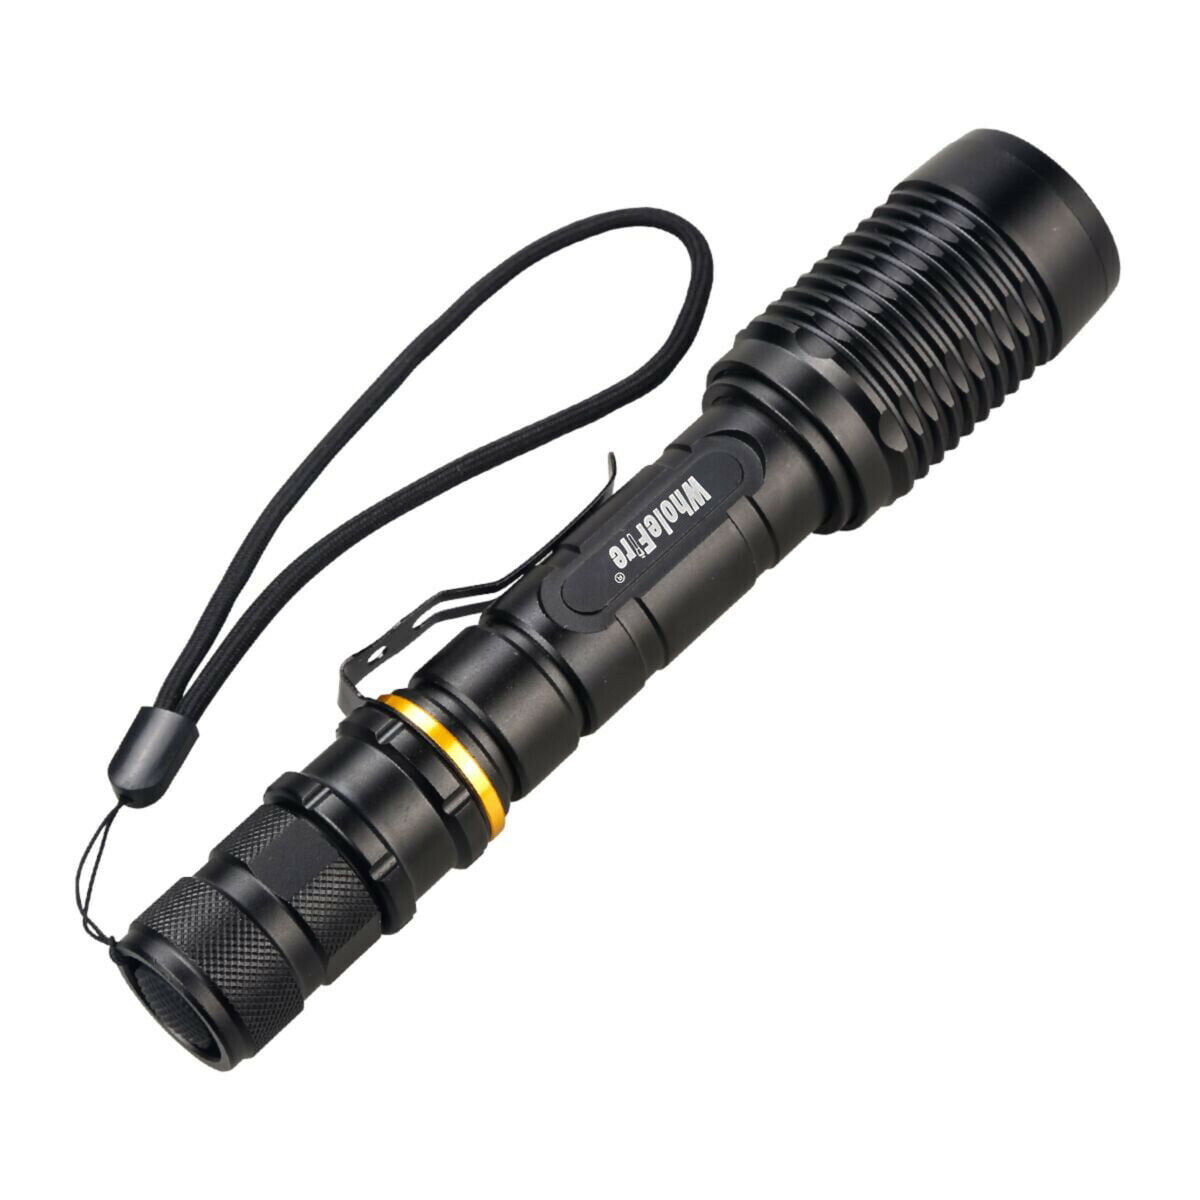 Tactical Security 990000Lumens LED 5 Mode 18650 Flashlight Military Zoom Torch